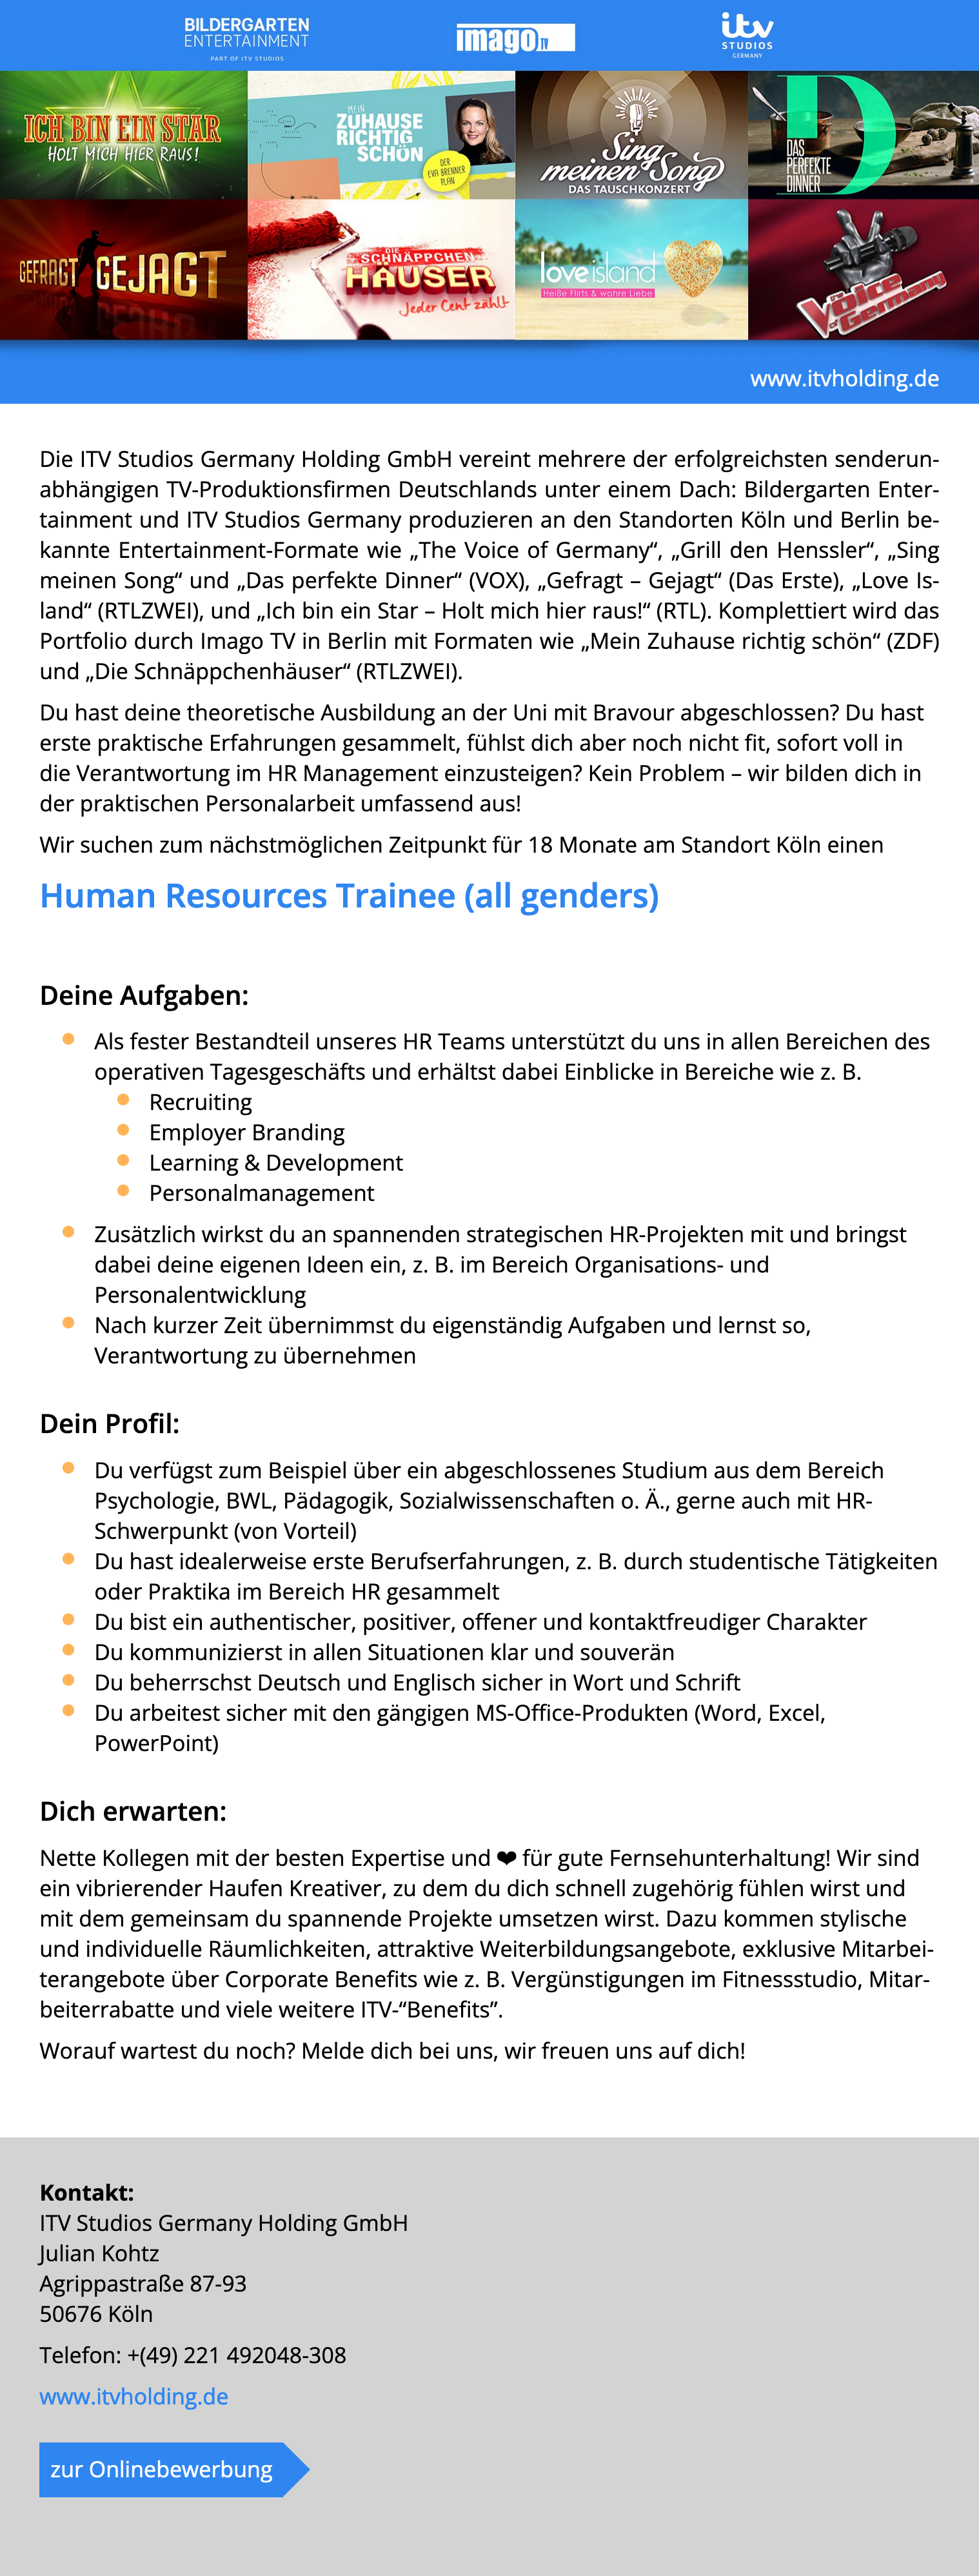 Human Resources Trainee (all genders) 